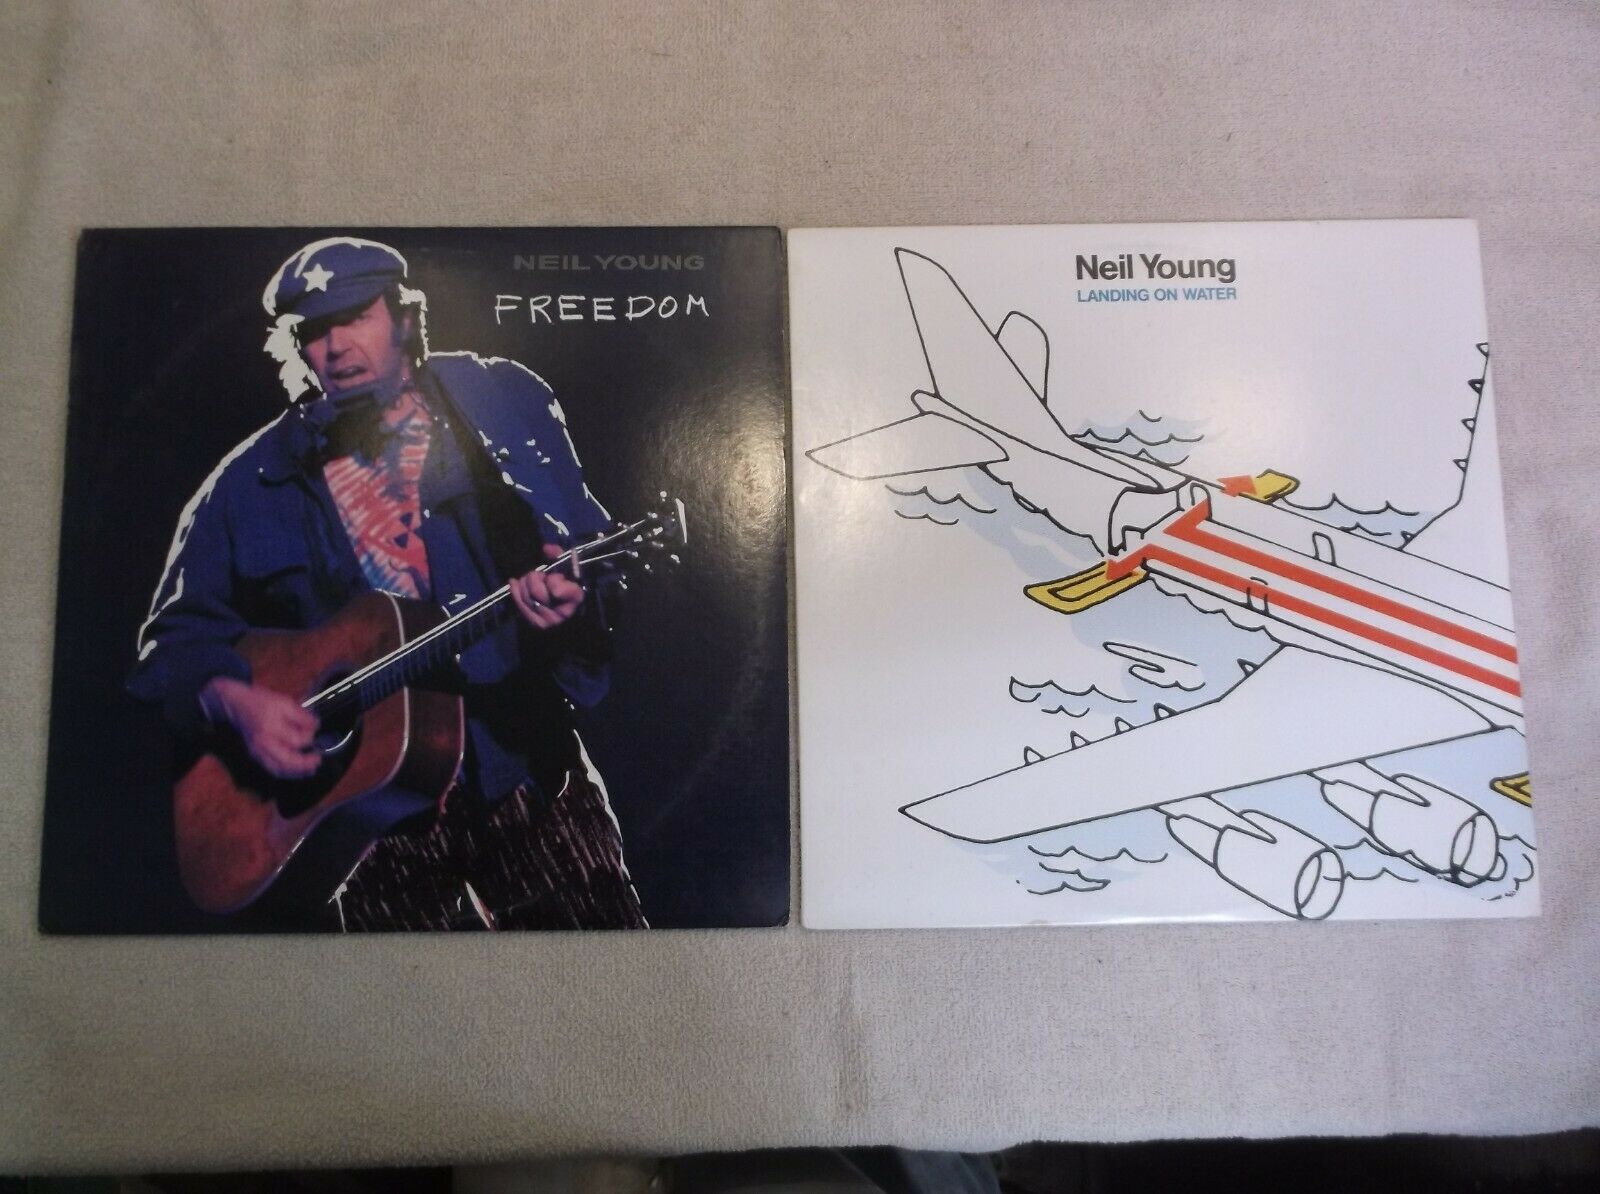 Neil Young, 1989 Freedom & 1986 Landing On Water, Vinyl Records.